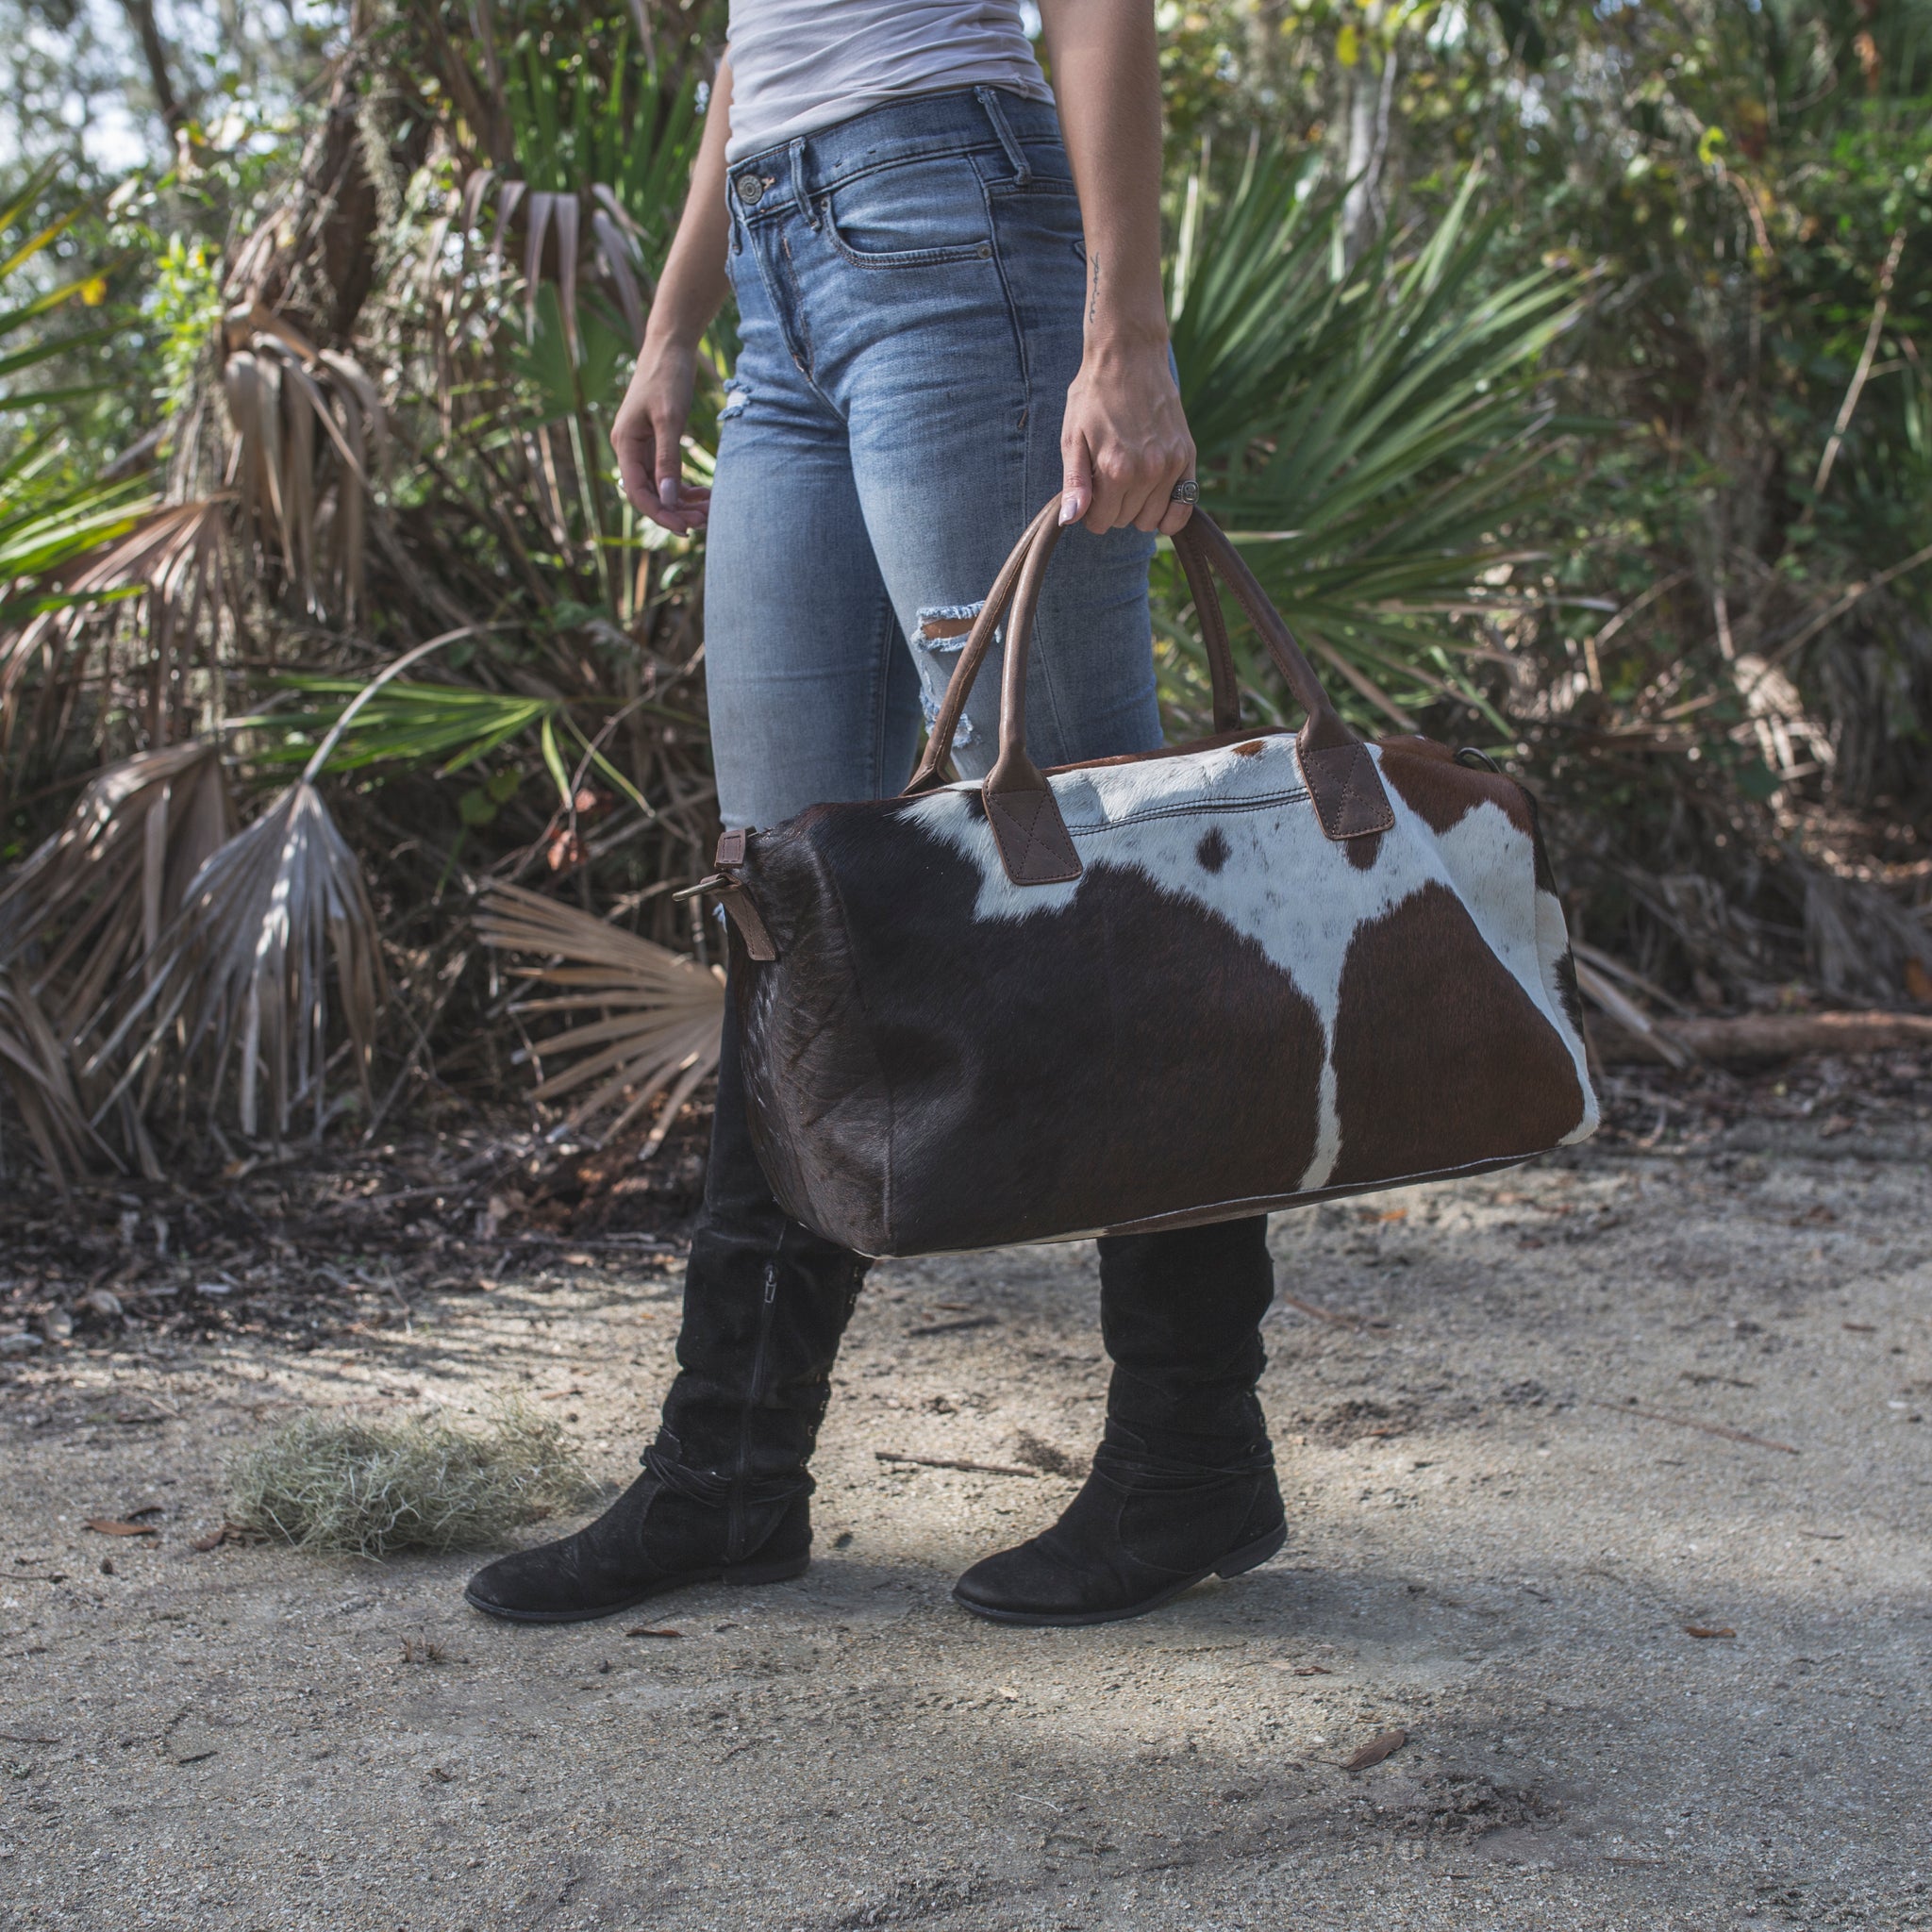 The Forty 8 Cowhide duffle